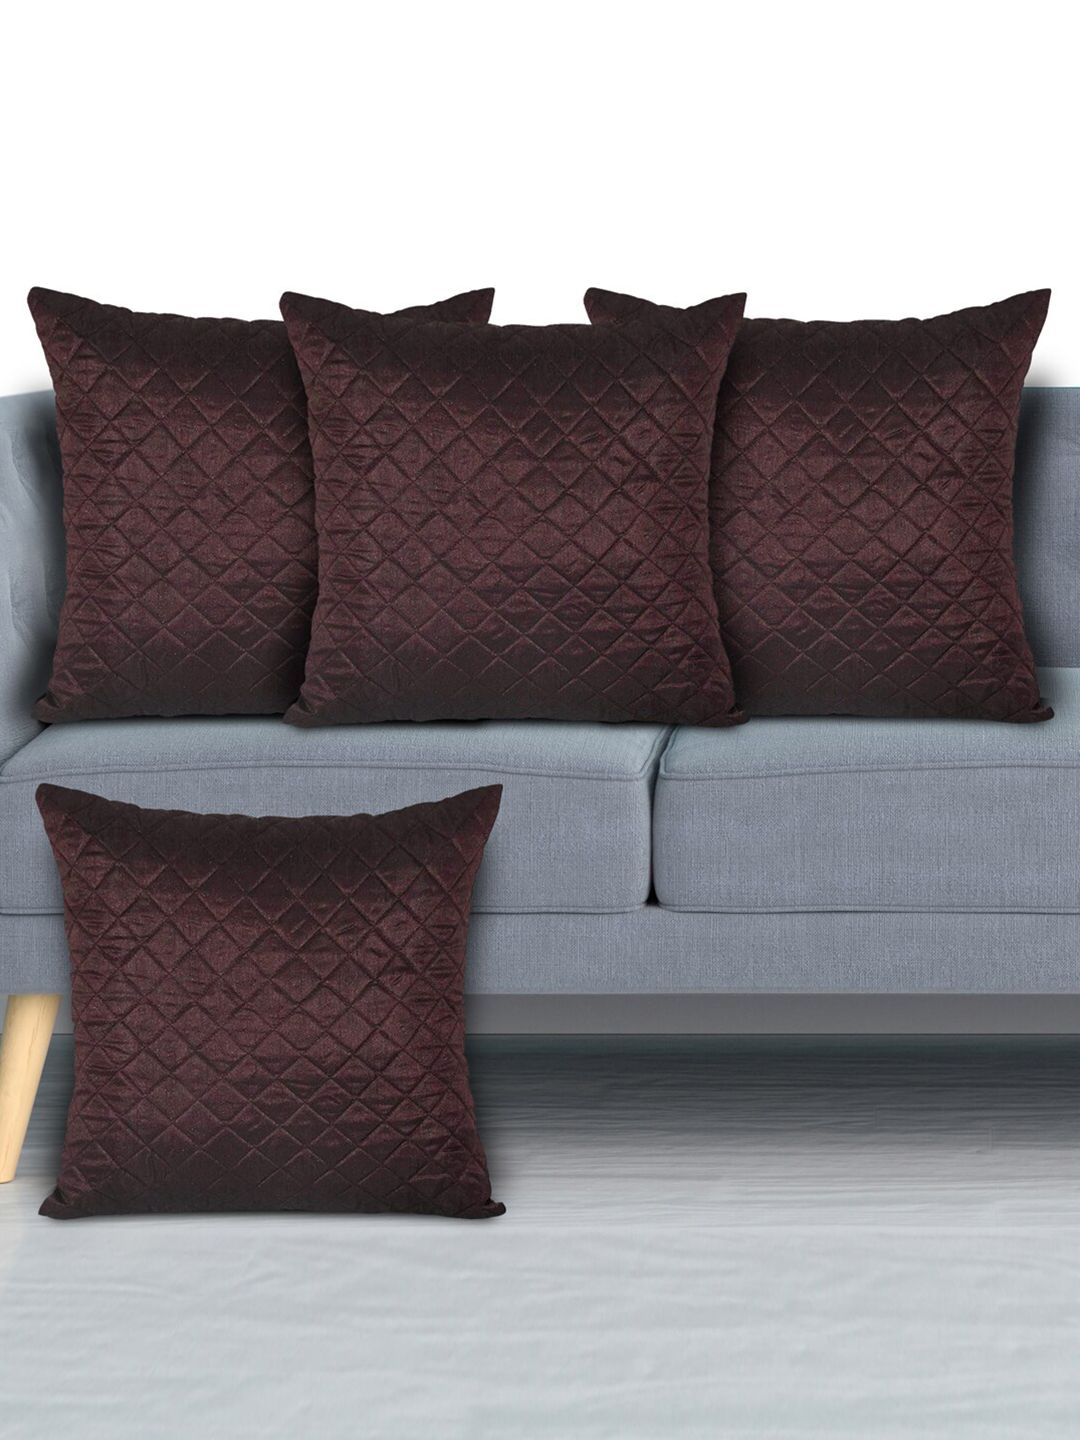 Kuber Industries Brown Set of 4 Geometric Square Cushion Covers Price in India